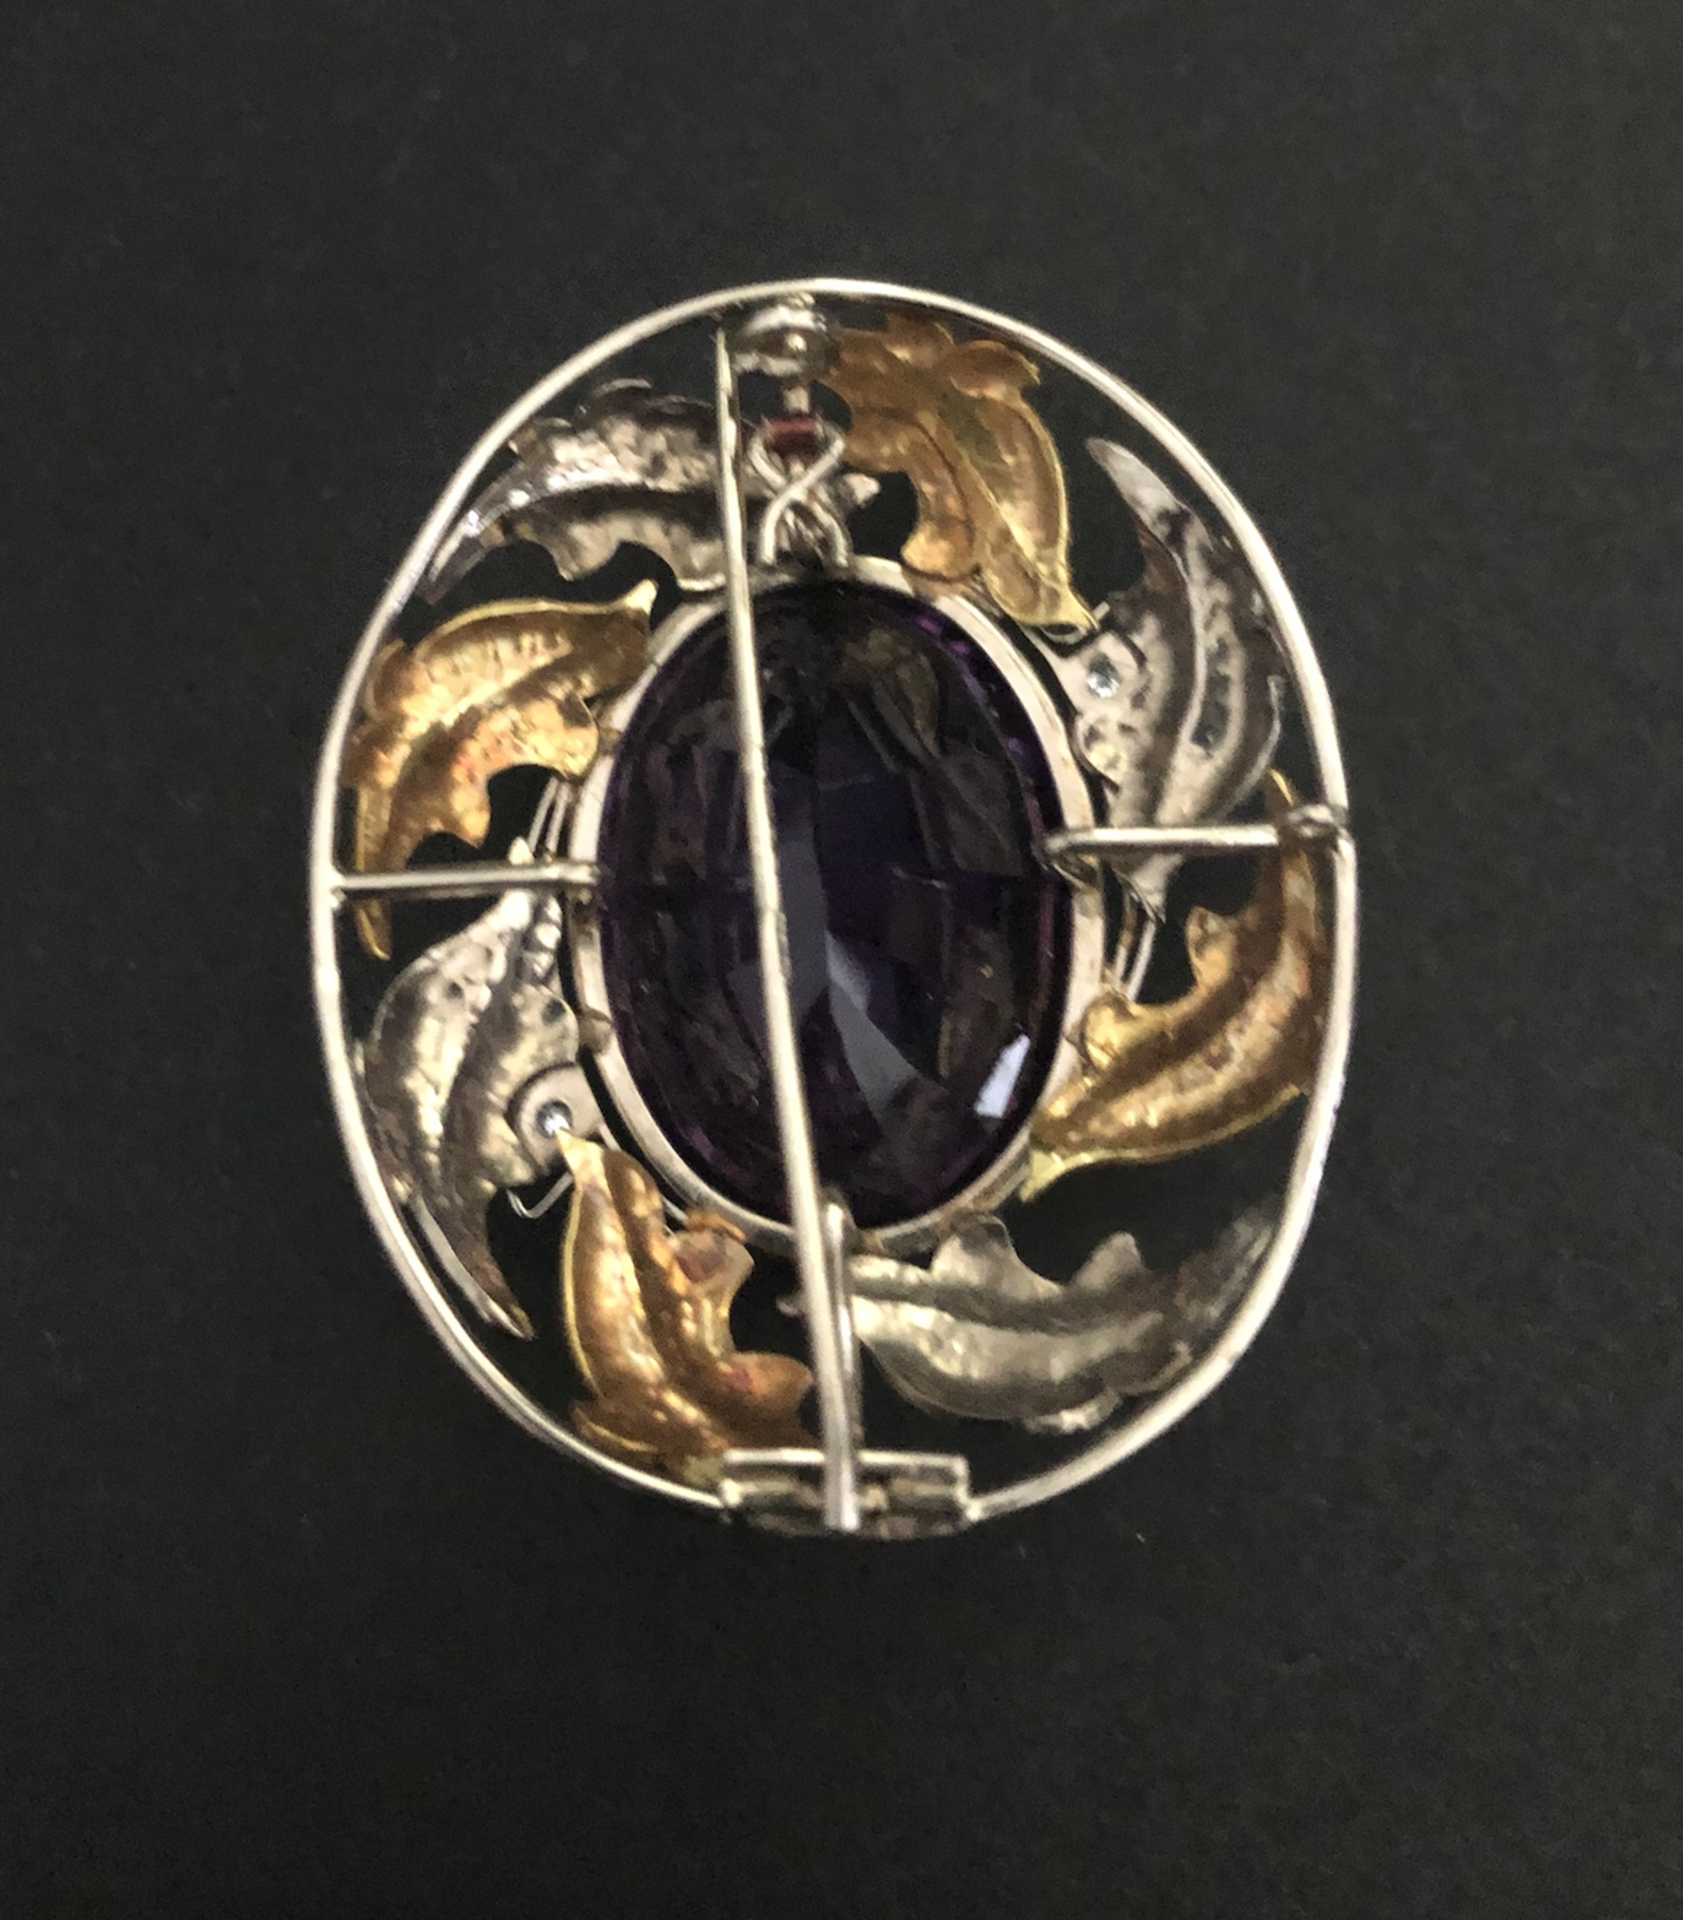 Type: Brooch Precious Metal: Description: 9 Carat Yellow & White Gold Brooch, set with huge Amethyst - Image 2 of 2